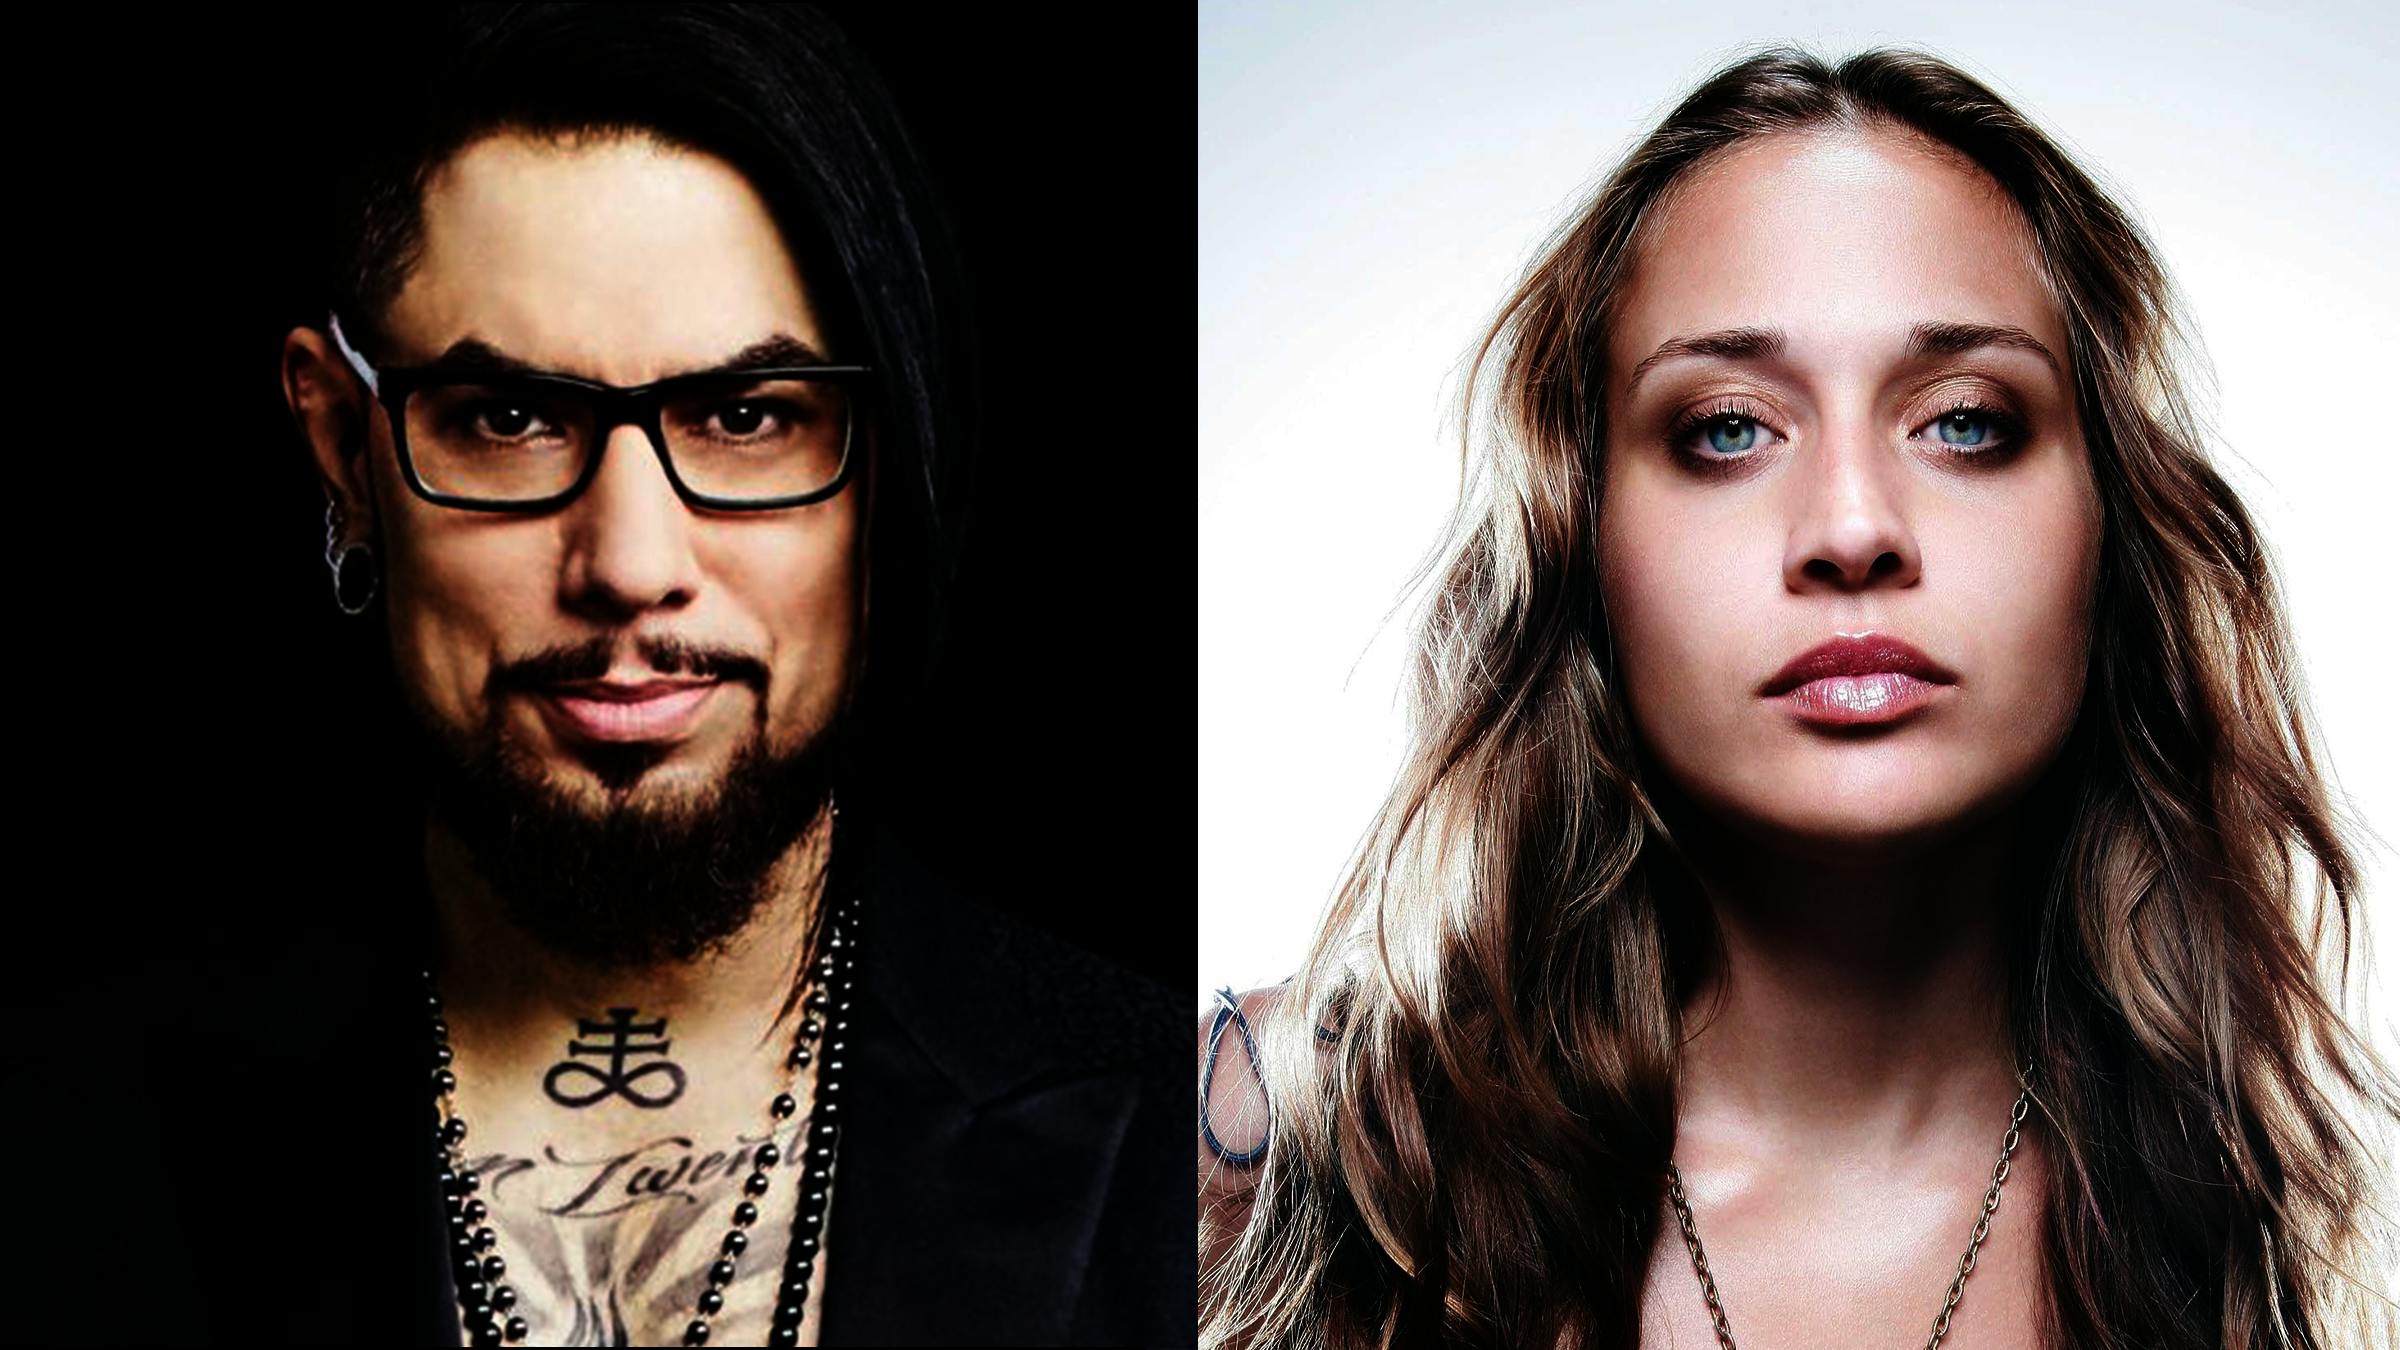 Dave Navarro Once Wrote Fiona Apple a Love Letter in His Own Blood